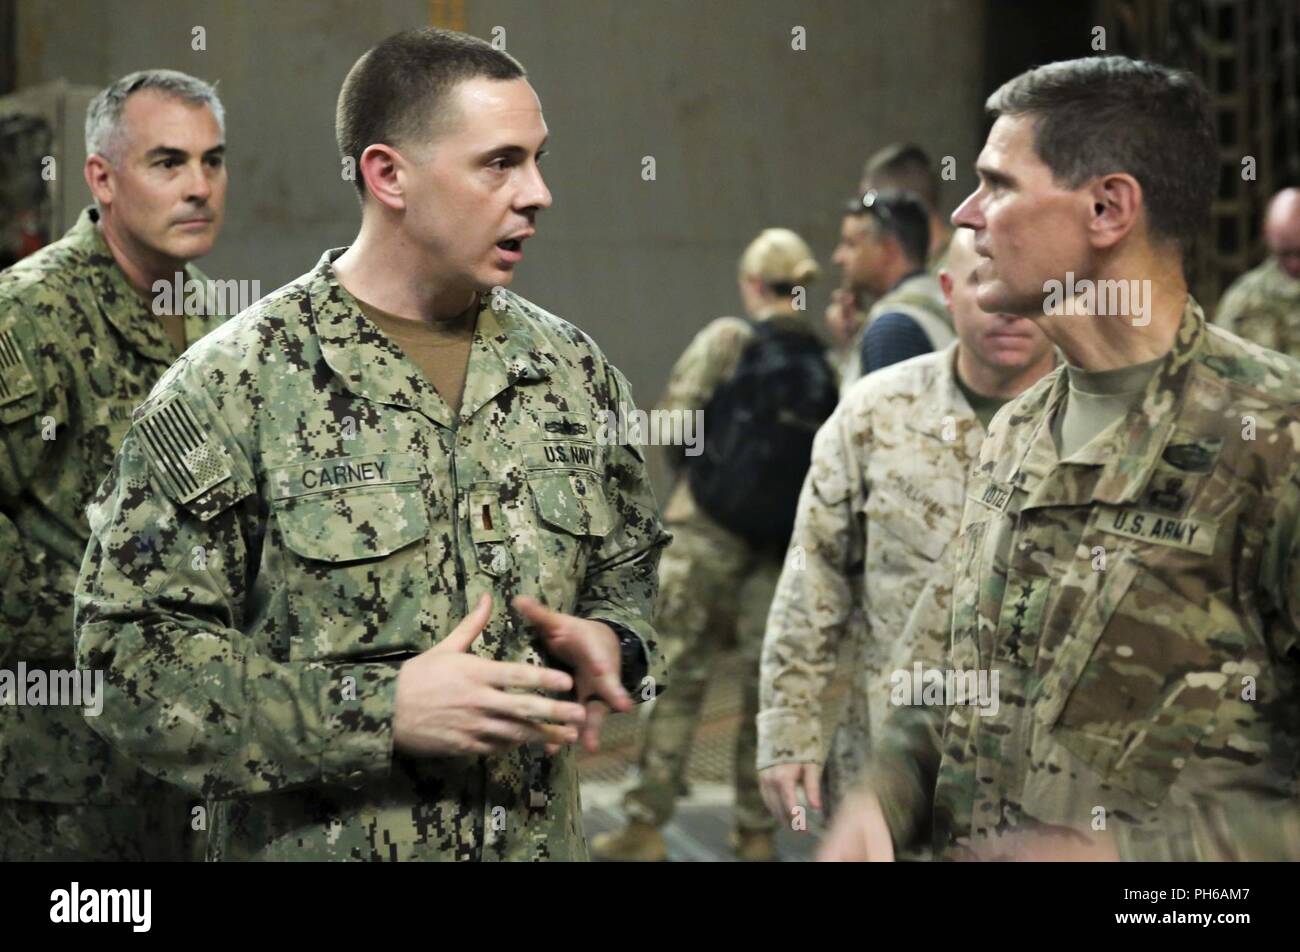 ARABIAN GULF (June 22, 2018) U.S. Army Gen. Joseph Votel, commander, U.S. Central Command,  speaks with U.S. Navy Ensign Brandon Carney aboard the Wasp-class amphibious assault ship USS Iwo Jima (LHD 7), June 22, 2018. Votel, Vice Adm. Scott Stearney, commander, U.S. Naval Forces Central Command, and other distinguished visitors took a tour of Iwo Jima and spoke with crew members and Marines with the 26th Marine Expeditionary Unit, who are currently deployed to the U.S. 5th Fleet of operations in support of maritime security operations to reassure allies and partners and preserve the freedom o Stock Photo